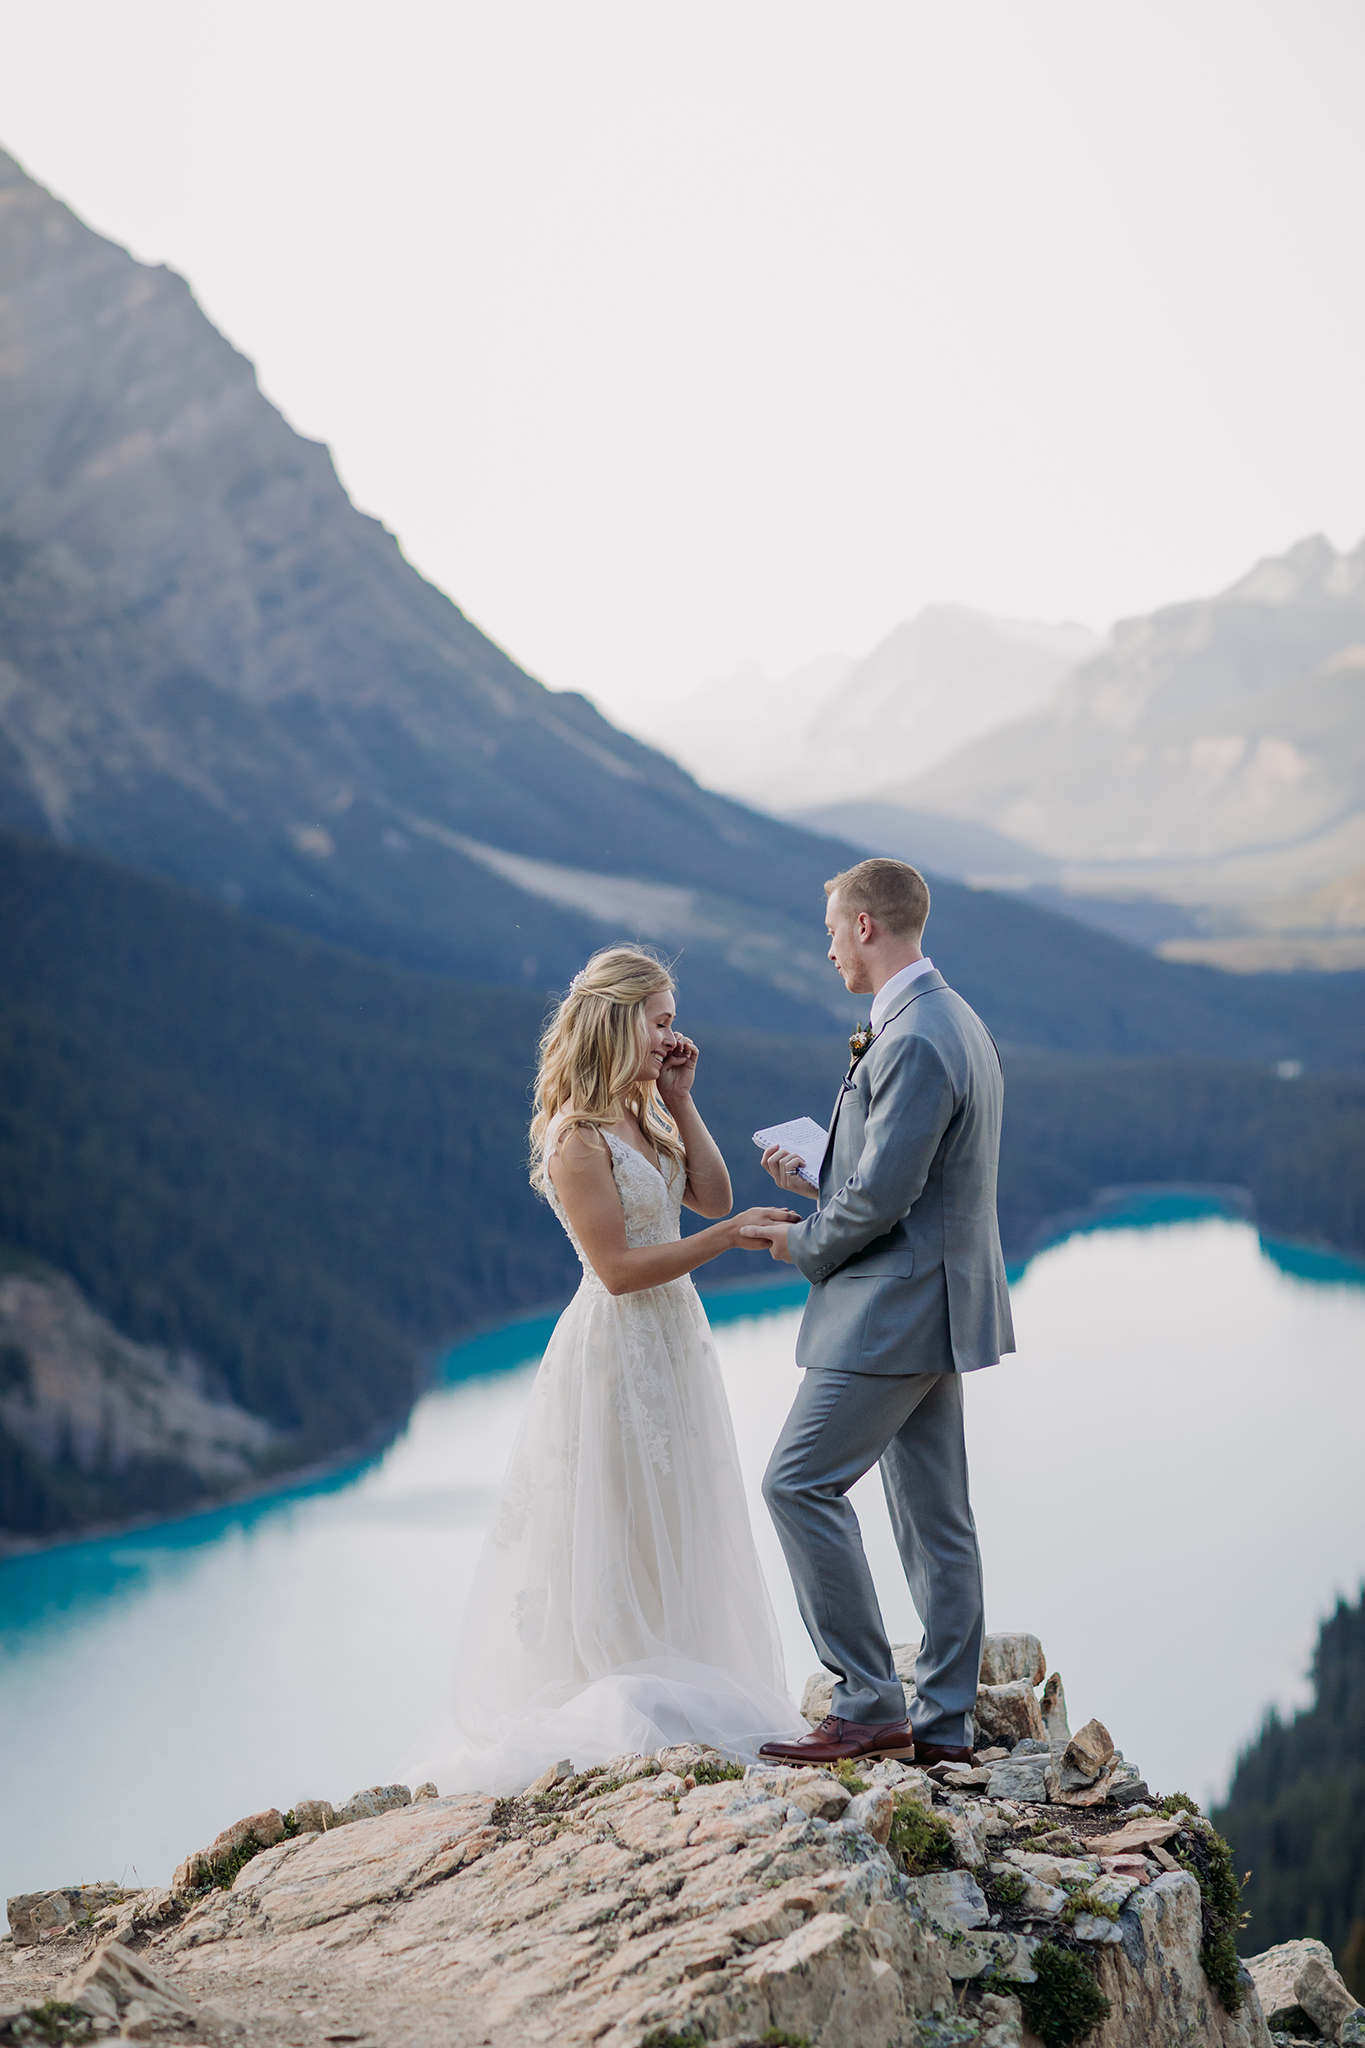 How to Get Married in 2020: Elope Now & Party Later! Peyto Lake elopement reading vows on mountaintop